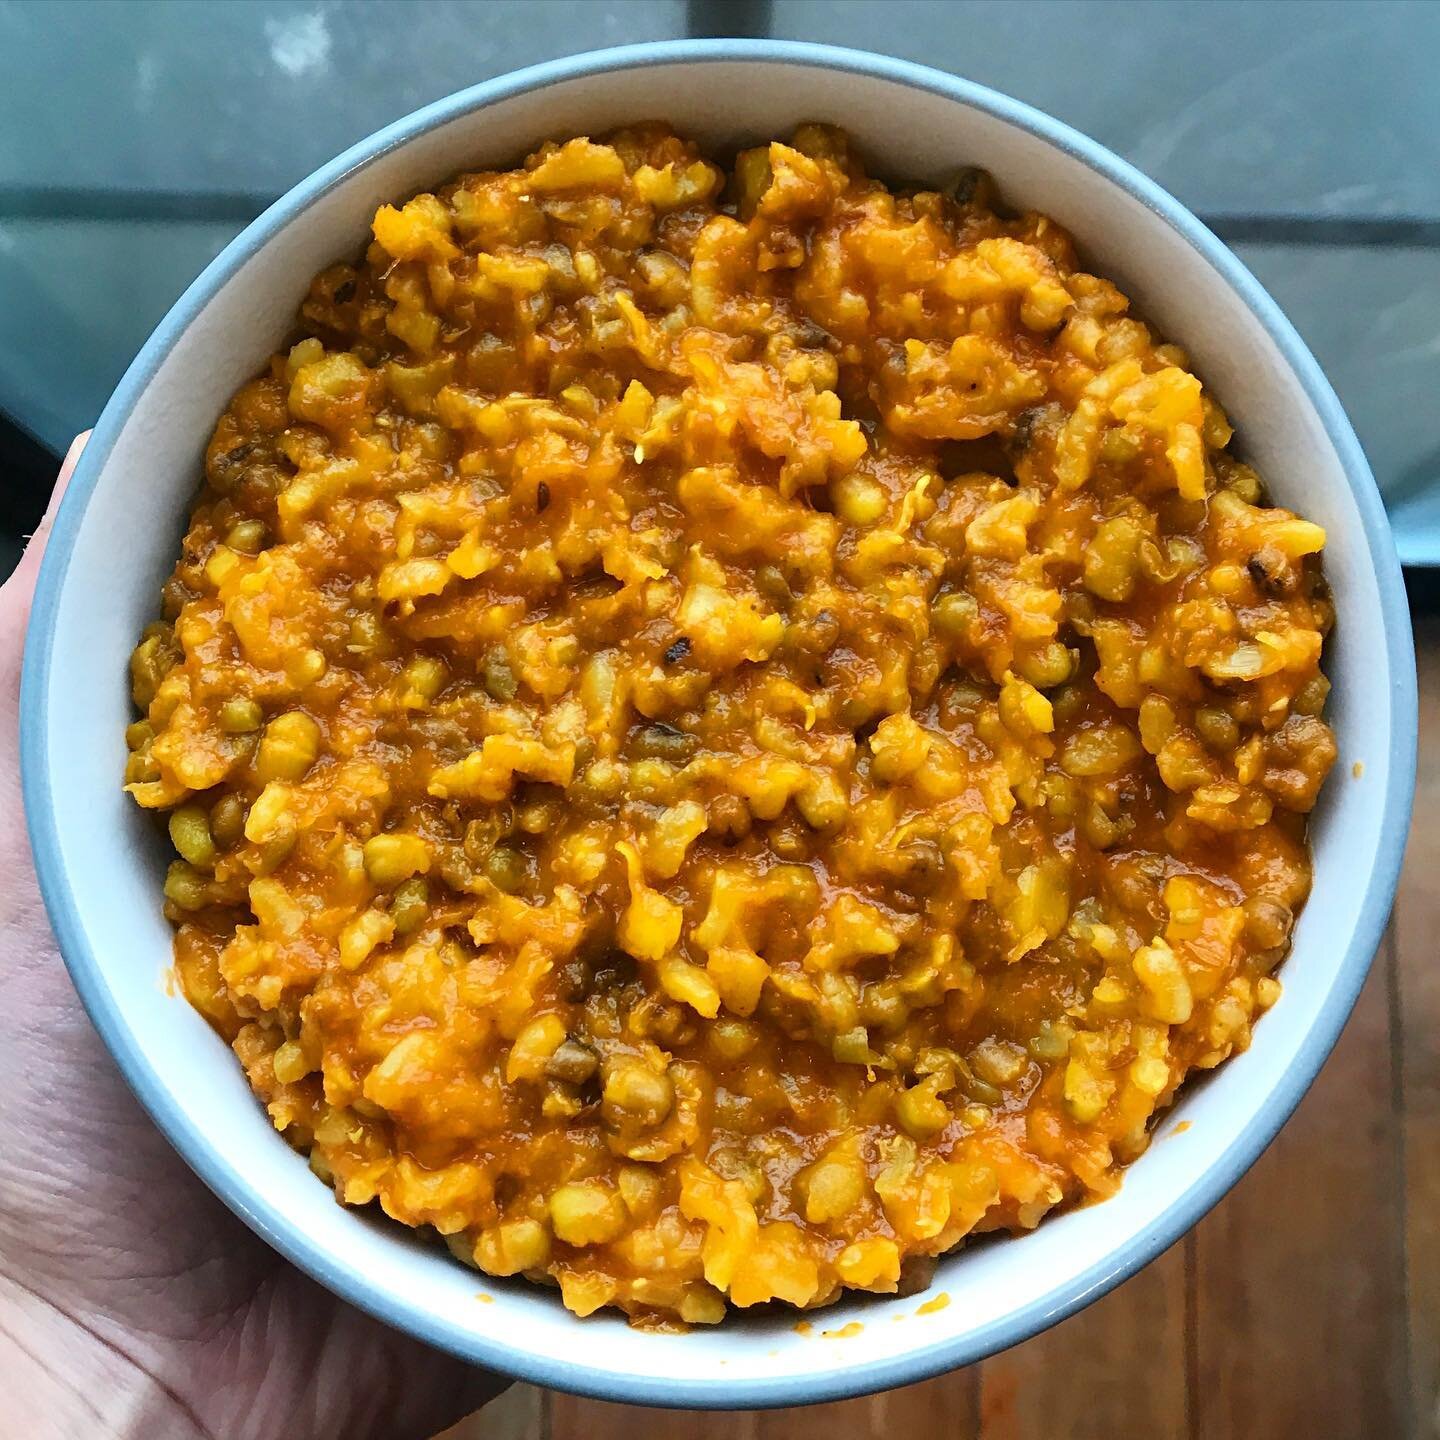 I made kitchari for the first time ever yesterday. When I did my yoga training in India, the chef would make this meal for anyone who felt sick. I was sick for a few days over there and this meal felt really soothing to eat.

According to Ayurveda (n